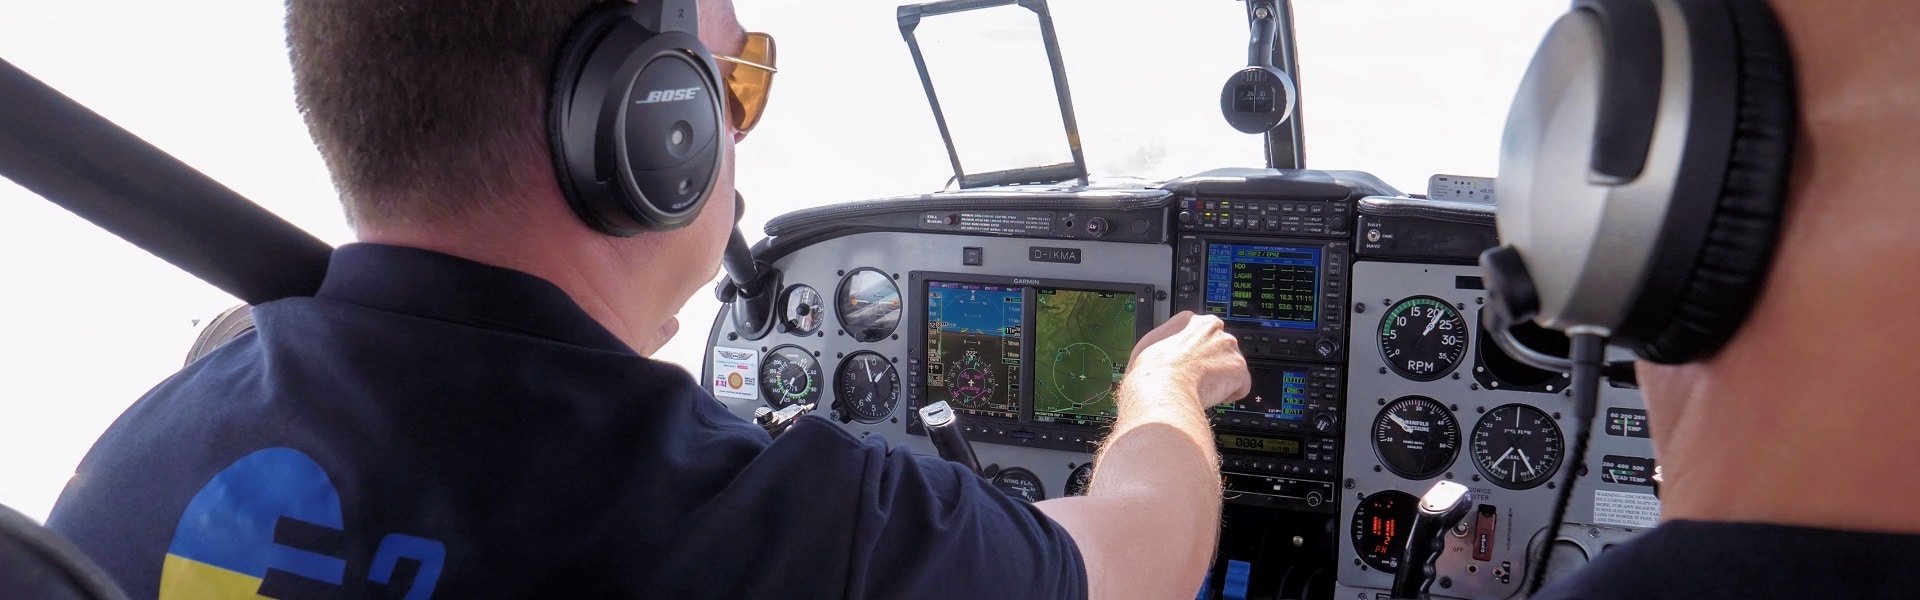 SAP Employee Connects Private Pilots to Save Ukrainian Lives